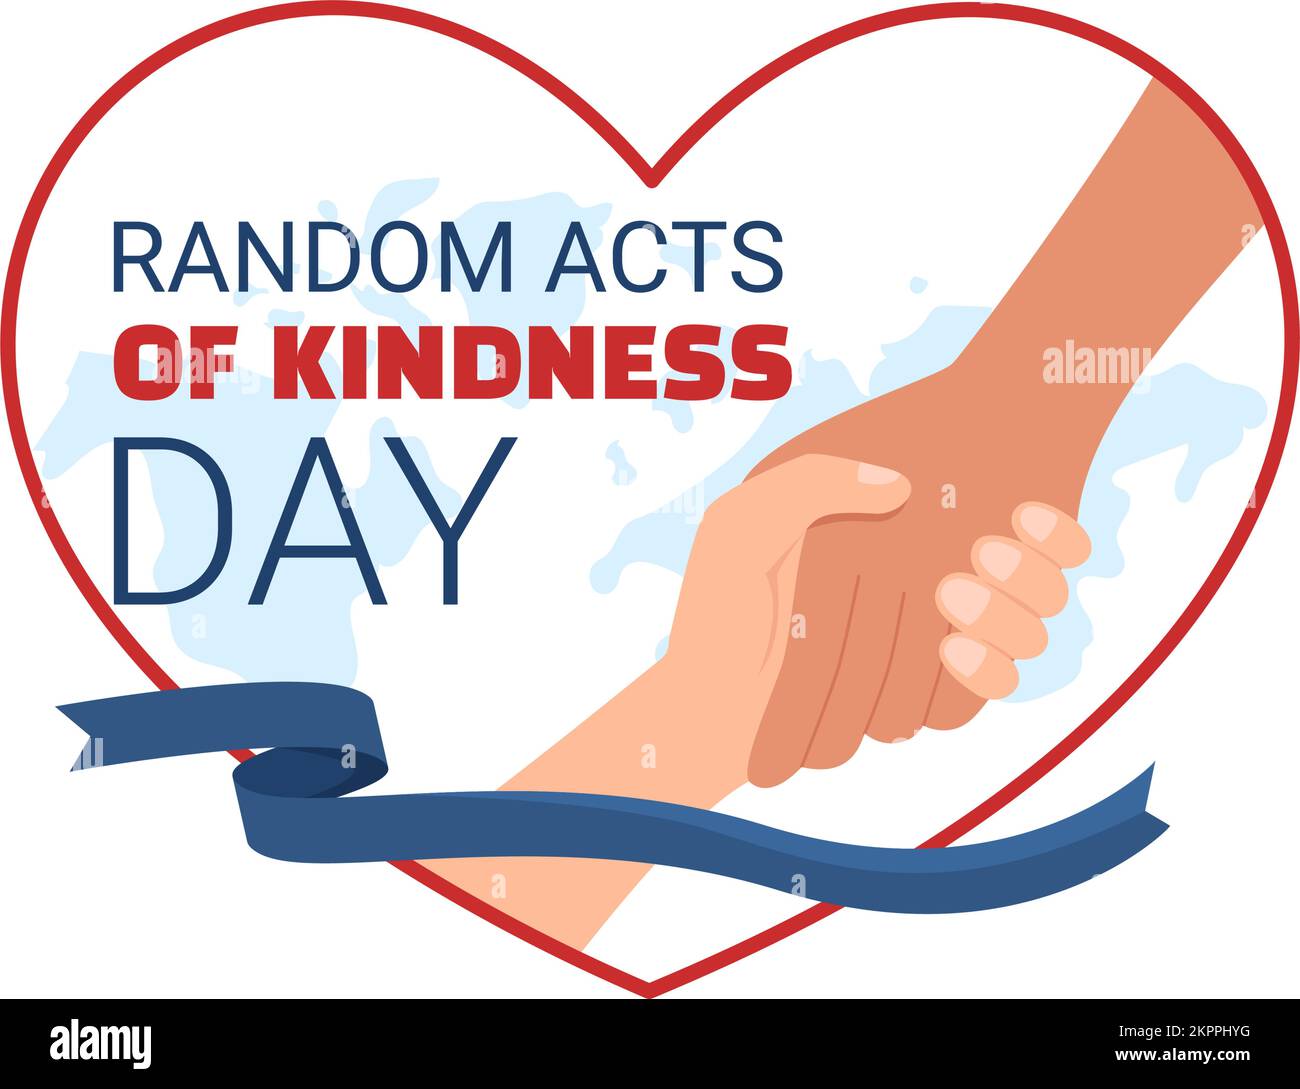 Random Acts Of Kindness On February 17th Various Small Actions To Give Happiness In Flat Cartoon 